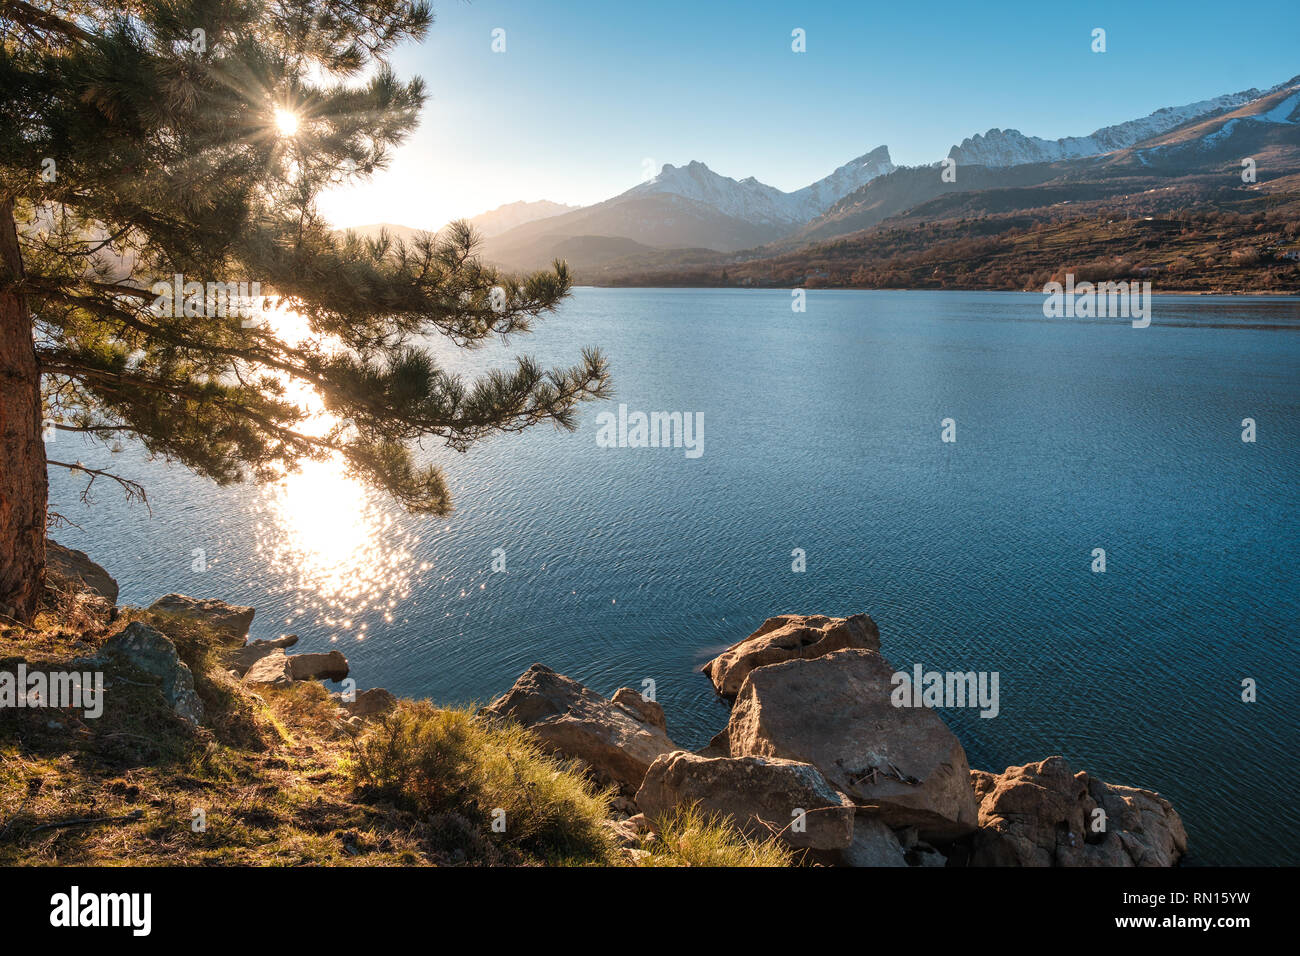 Late afternoon sunshine filtering through a pine tree on the banks of Lake Calacuccia in Corsica with snow capped Paglia Orba mountain in the distance Stock Photo